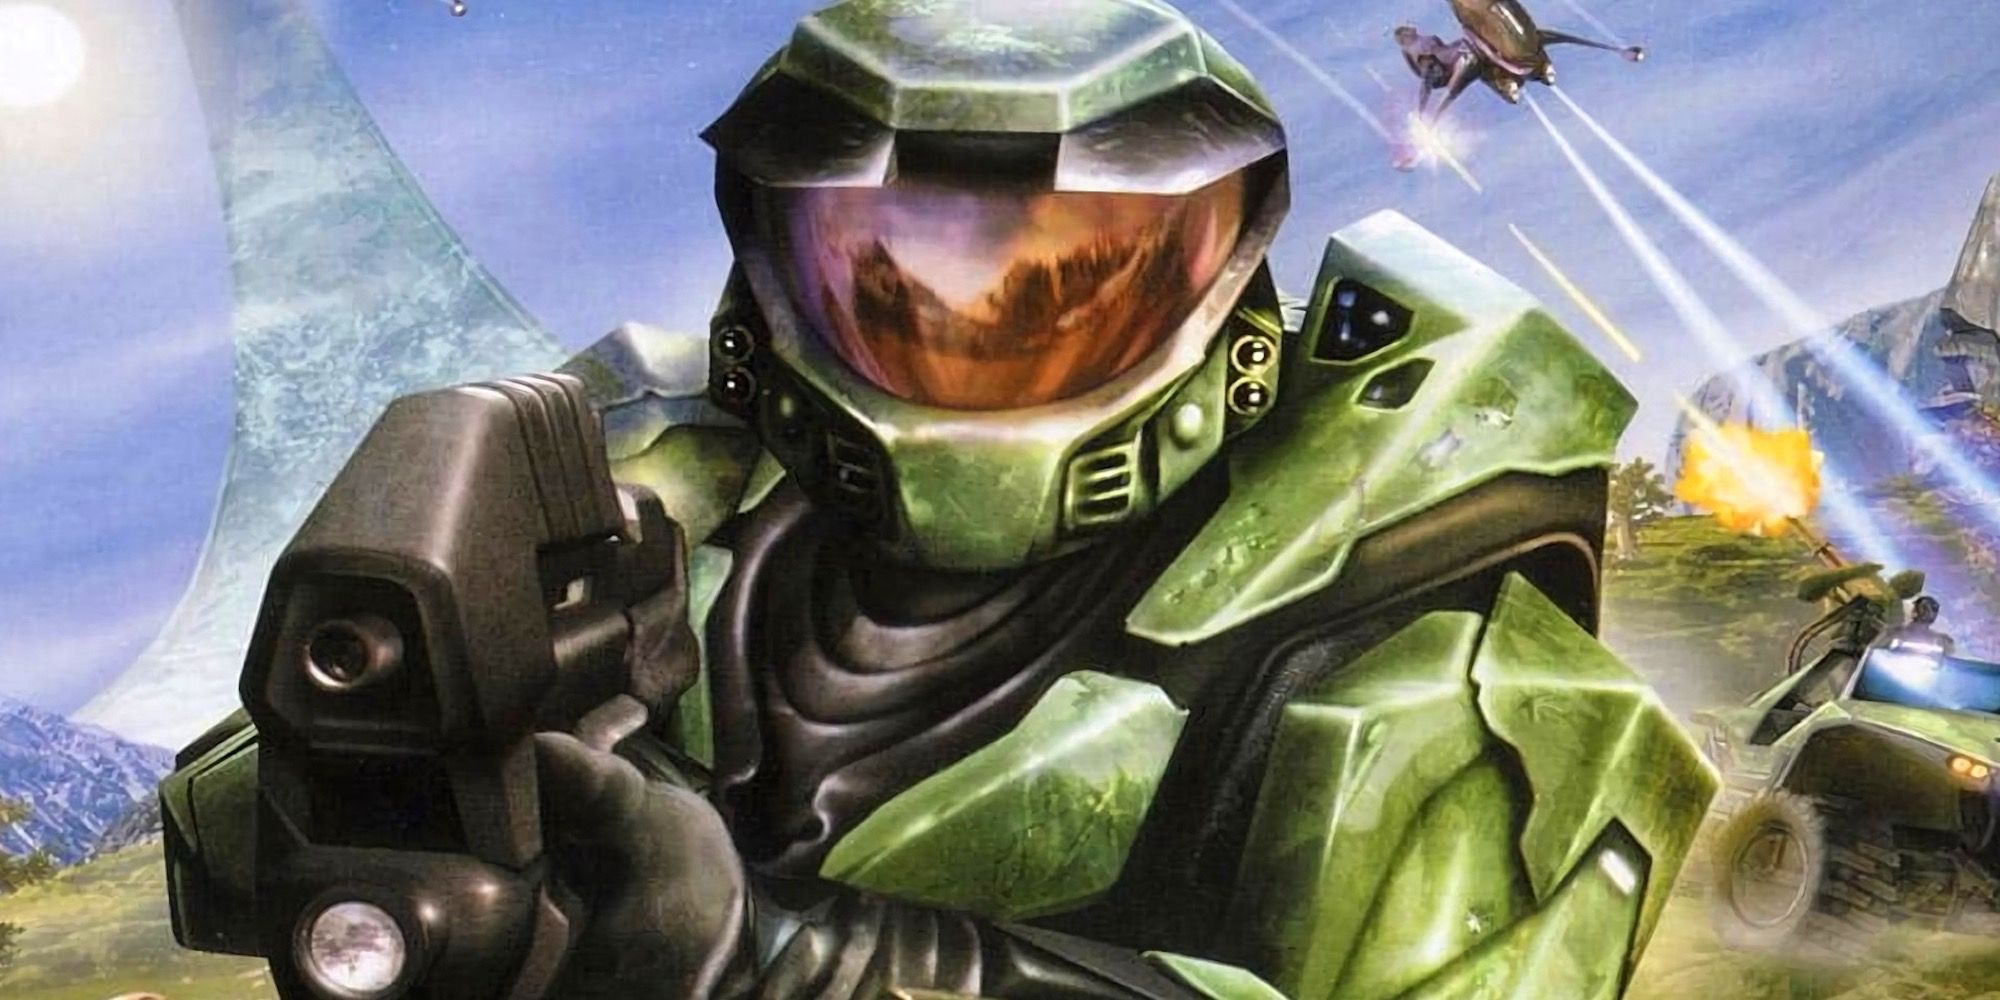 Promo art featuring characters in Halo Combat Evolved